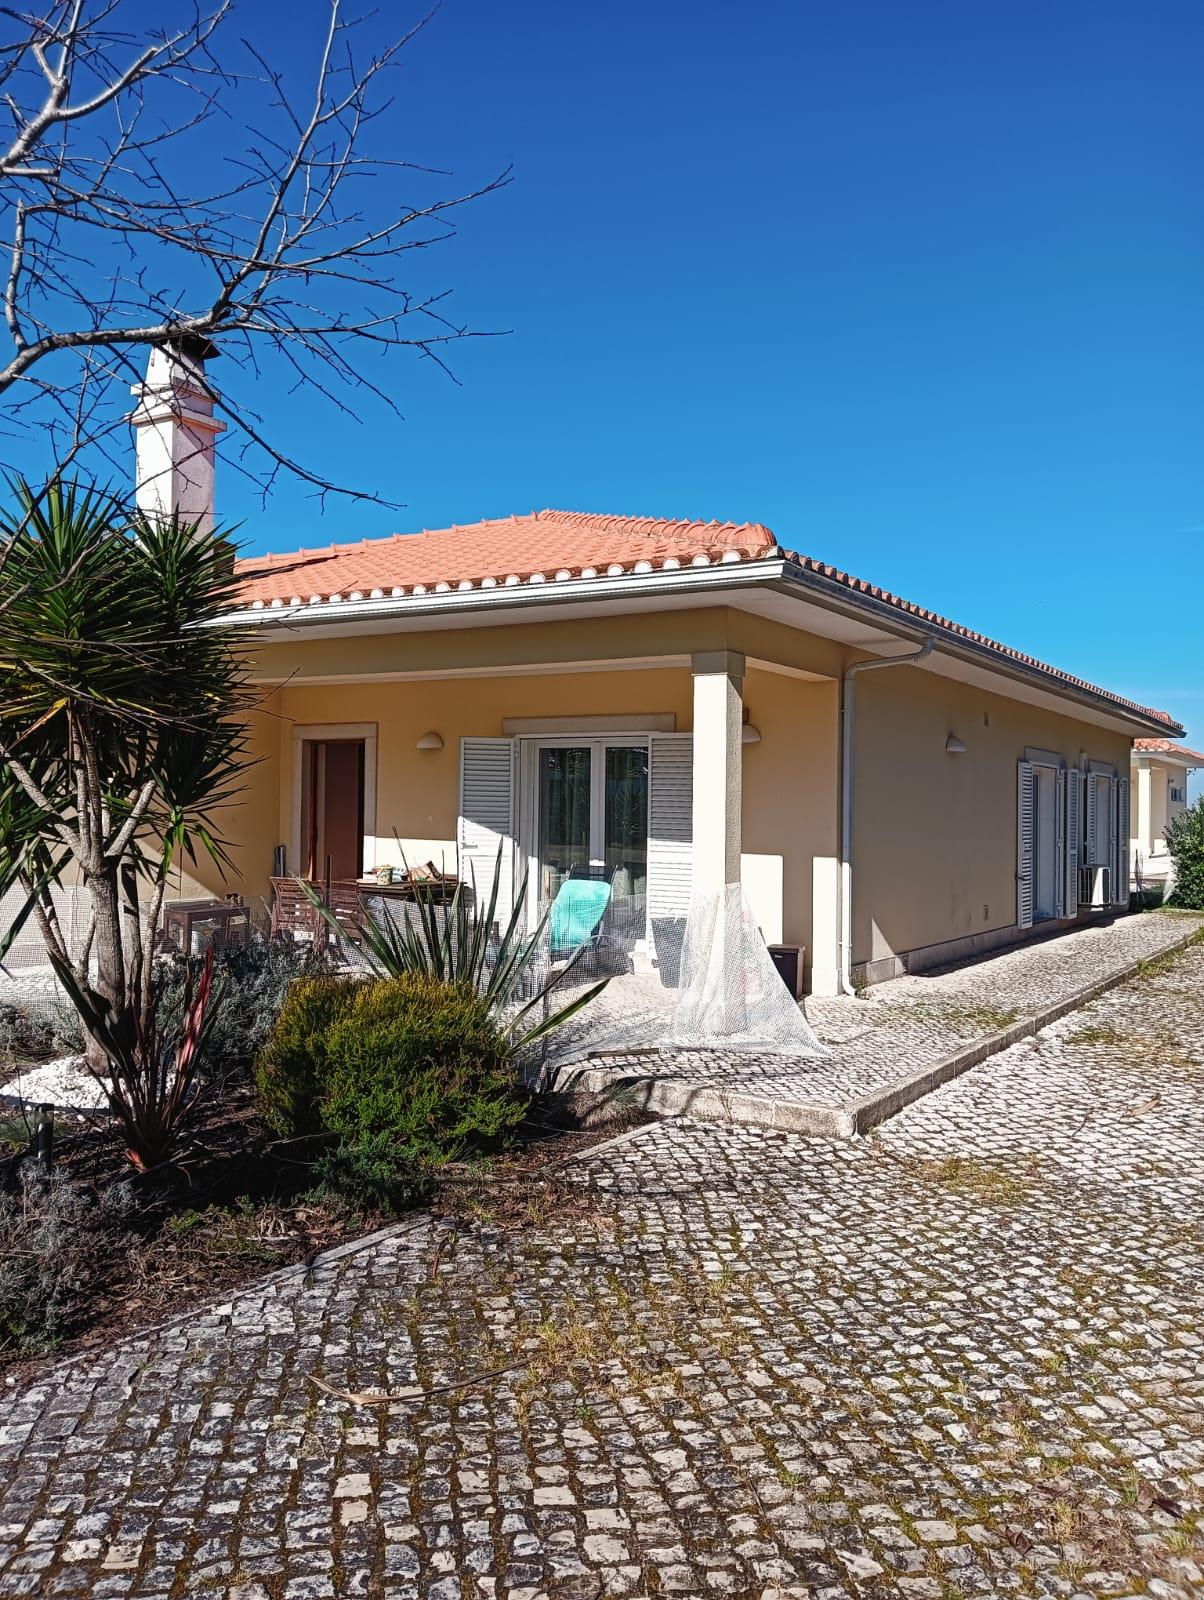 Fantastic Detached House 2 Minutes from Praia do Meco